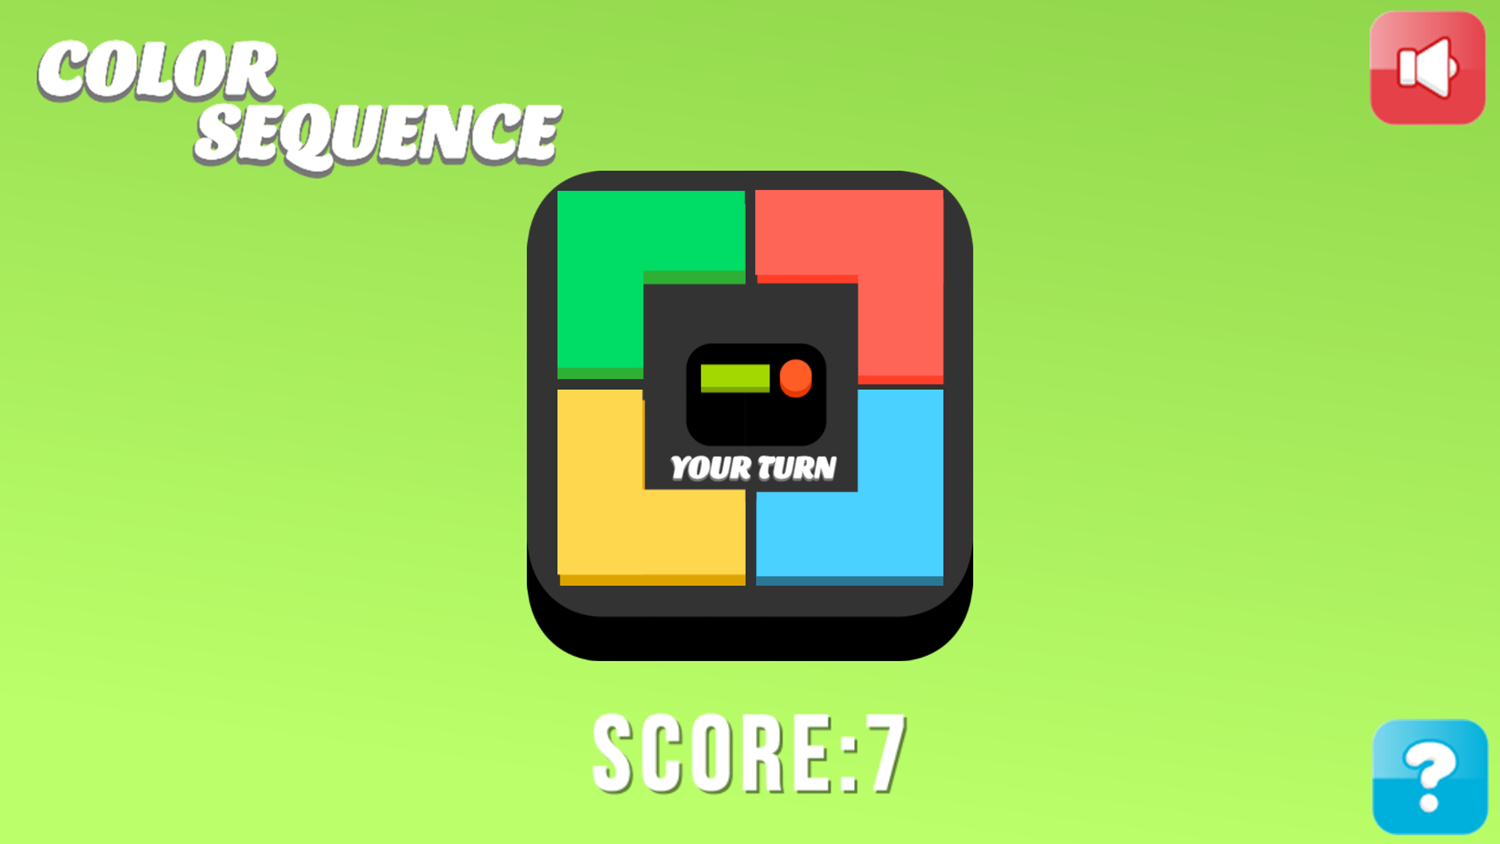 Color Sequence Game Play Screenshot.